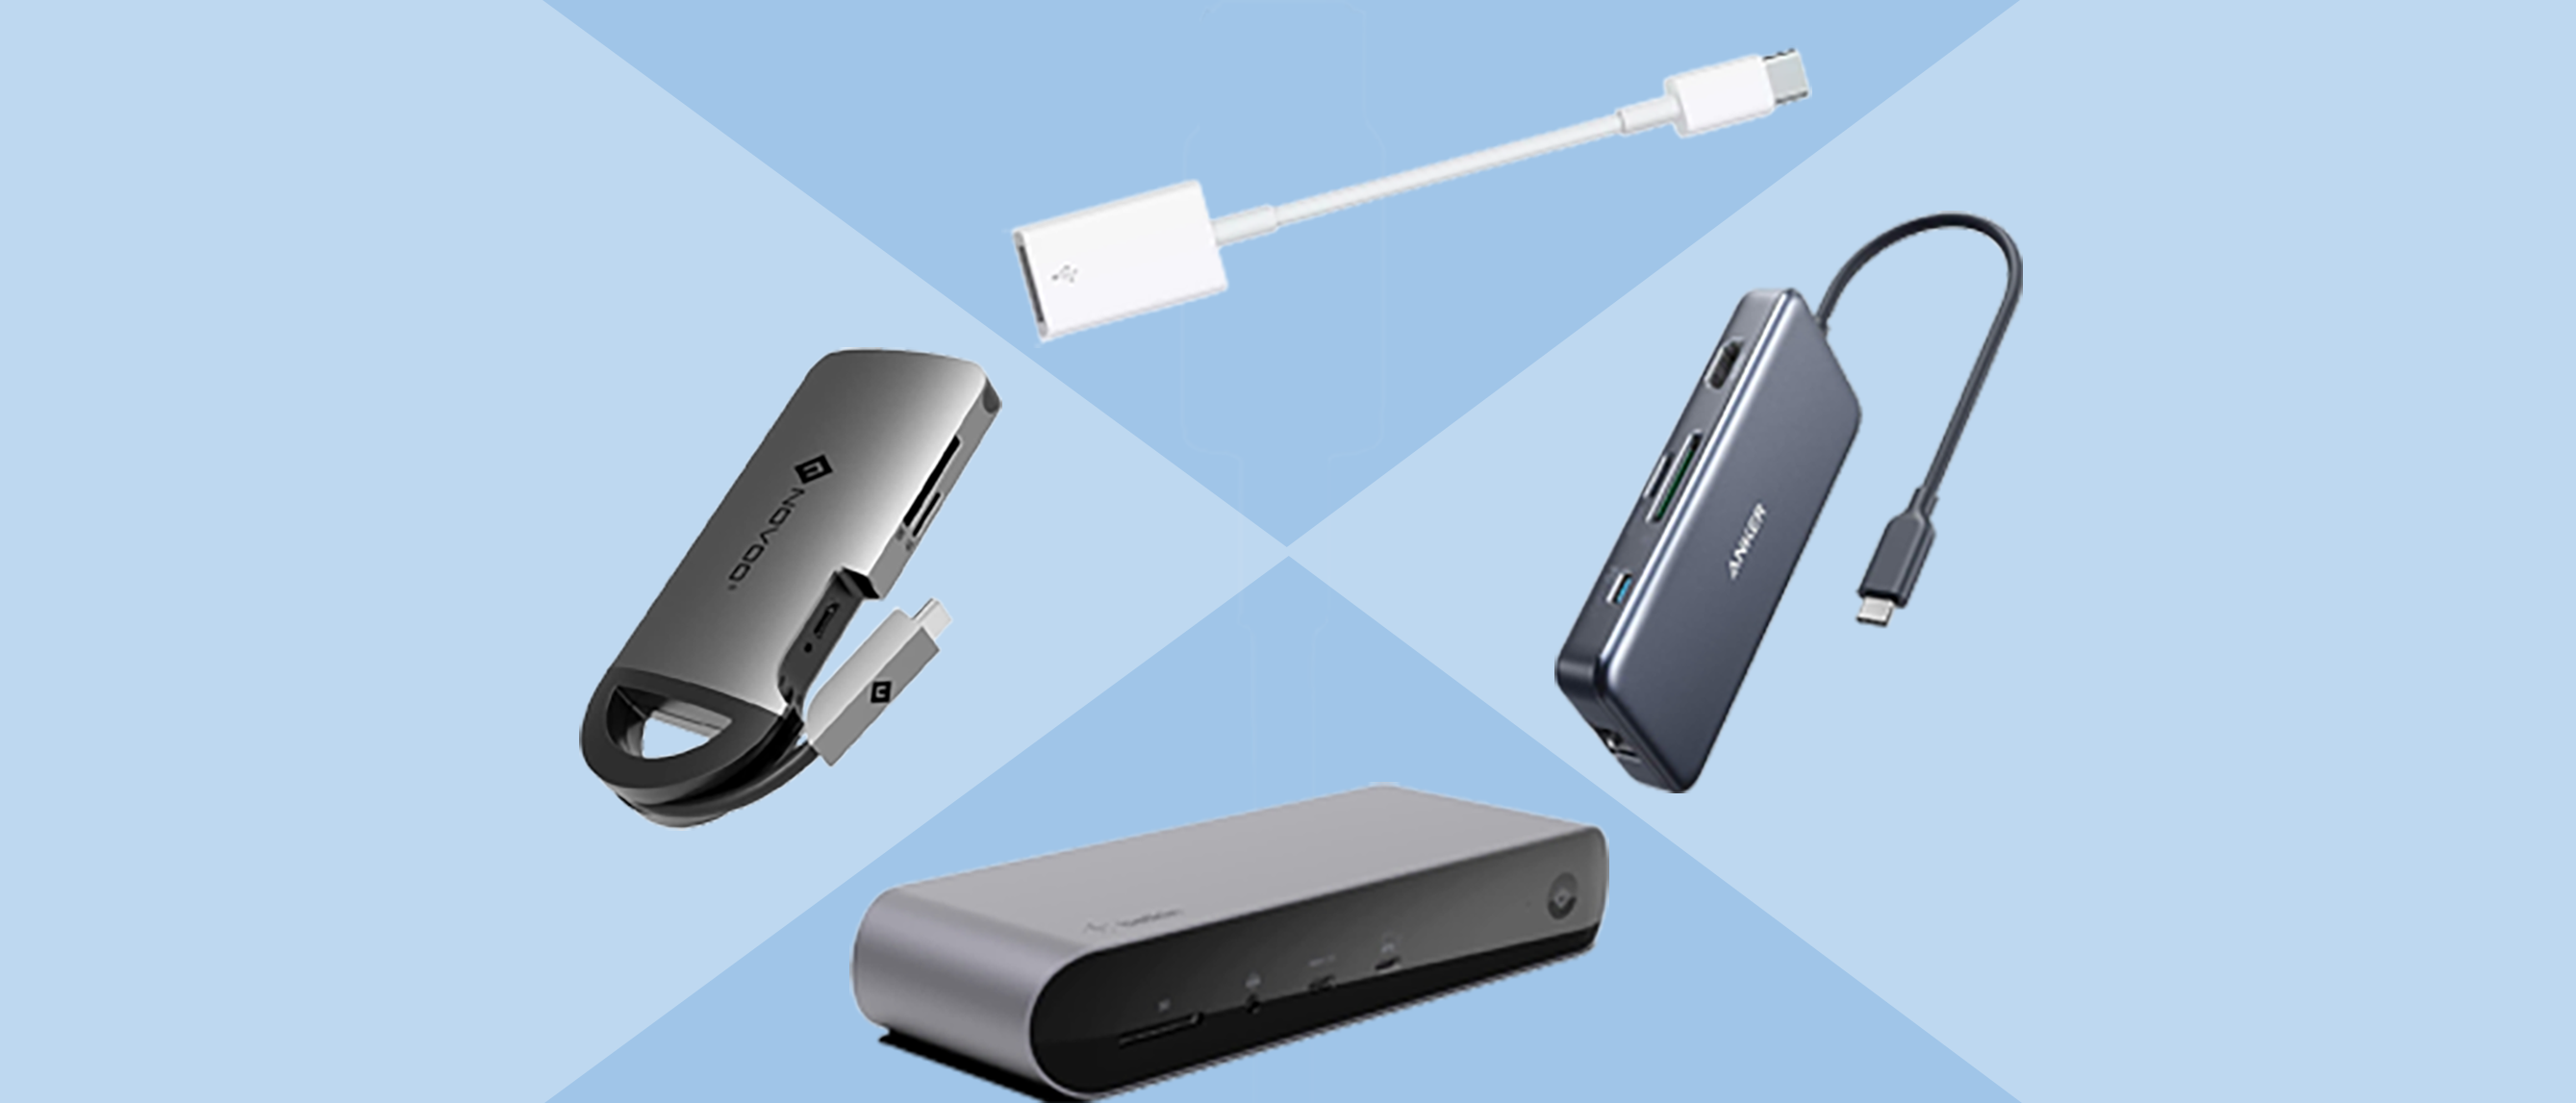 Add ports to your M1 MacBook with this awesome Anker USB-C hub